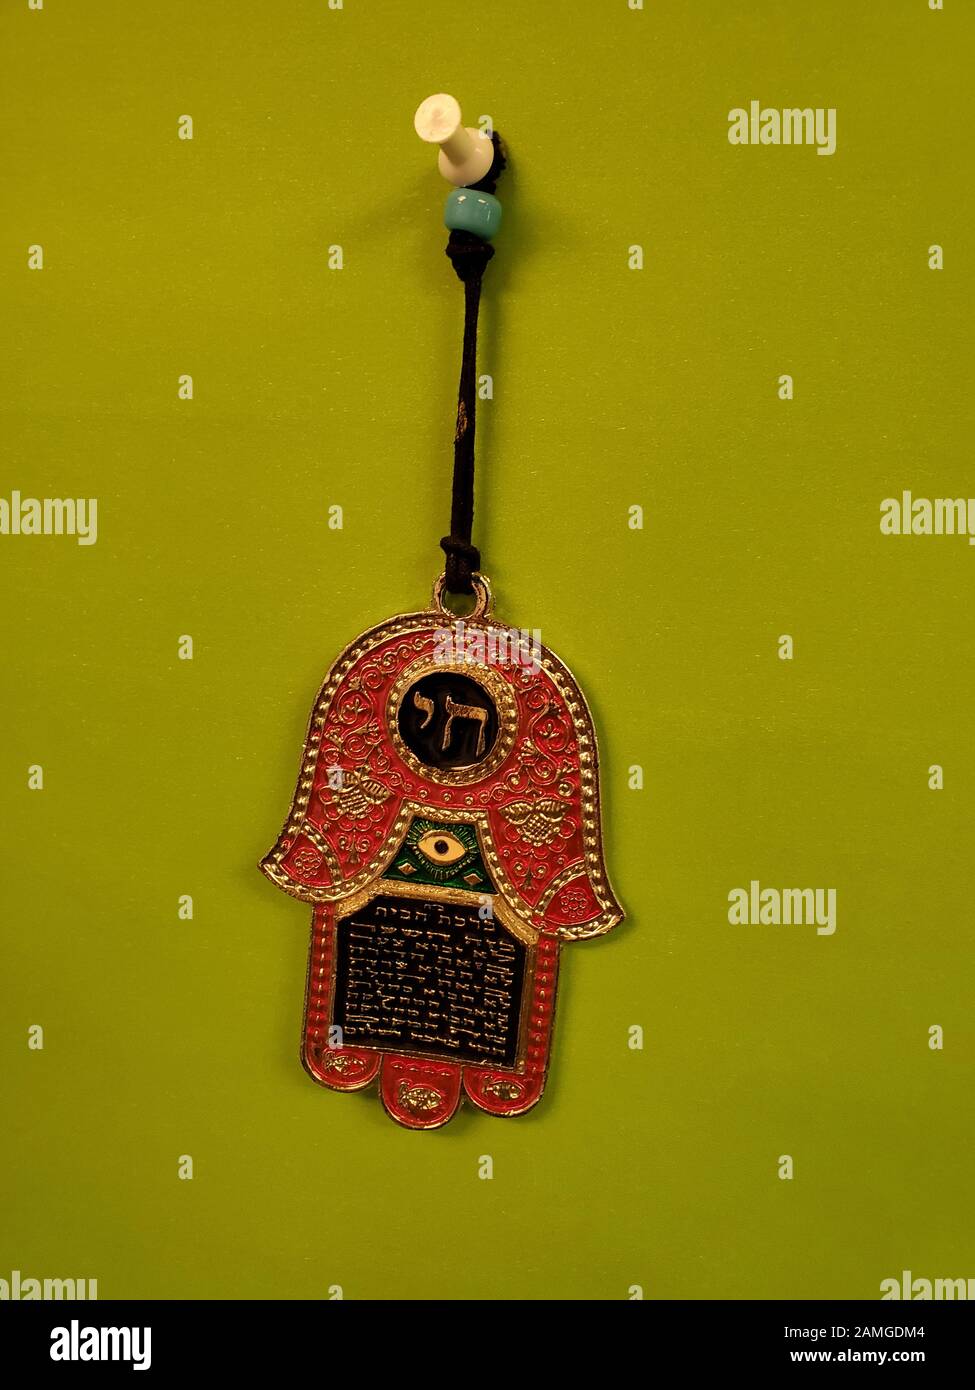 Close-up of traditional Jewish Chamsa, a charm worn to combat the Evil Eye in Jewish mysticism (Kaballah), on a light green background, November 18, 2019. () Stock Photo